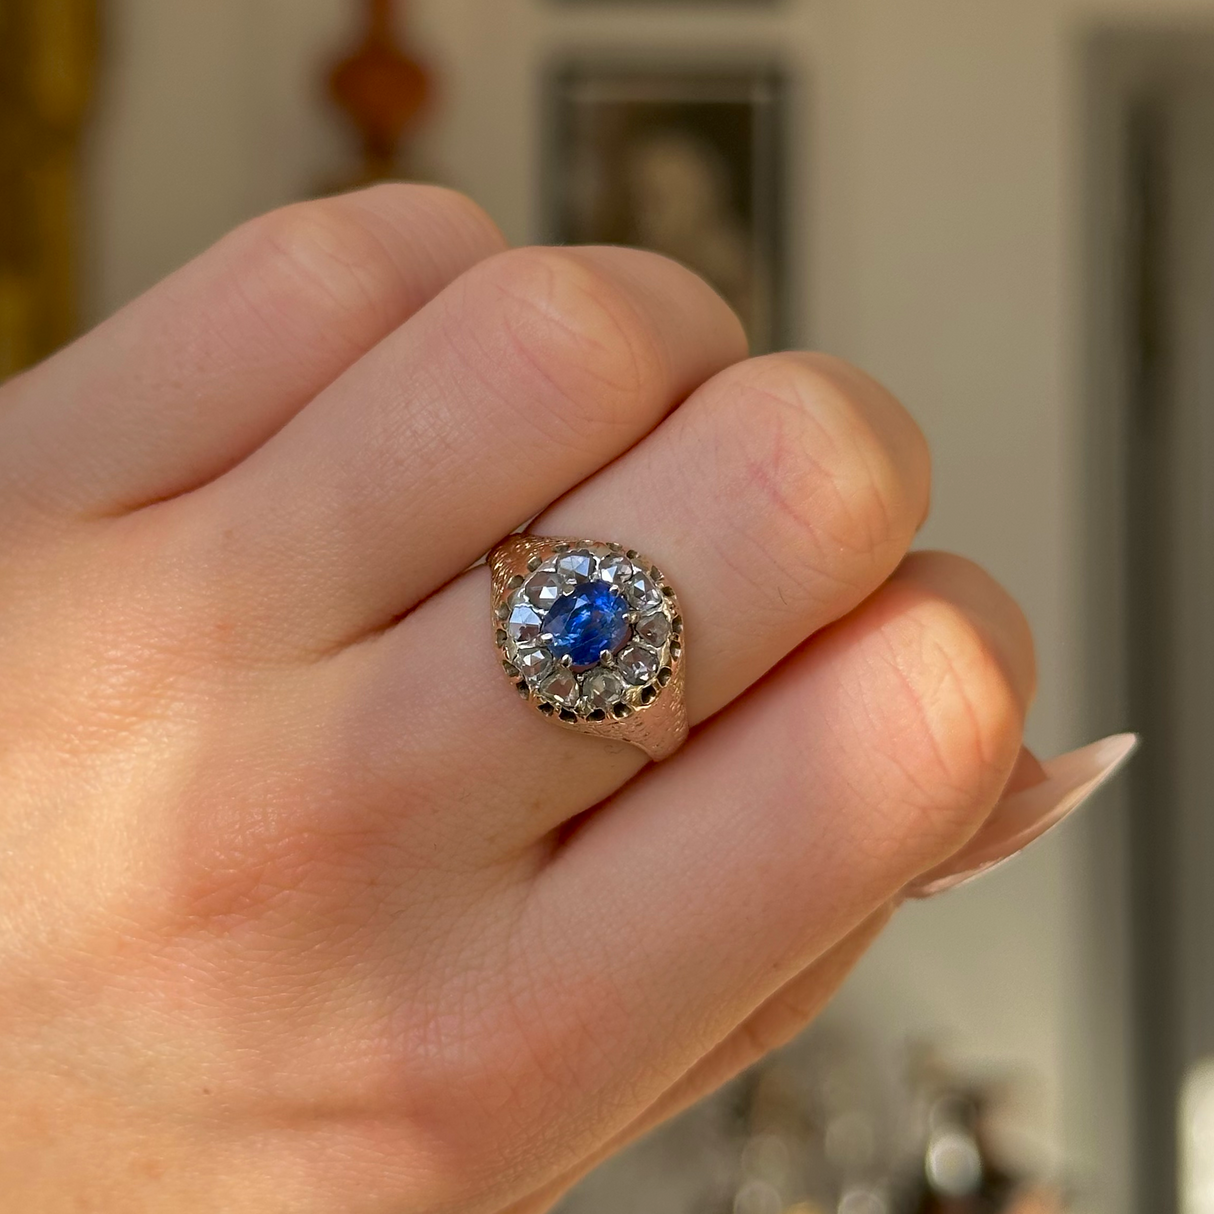 Antique, Victorian Sapphire and Diamond Daisy Cluster Ring, 18ct Yellow Gold worn on closed hand. 